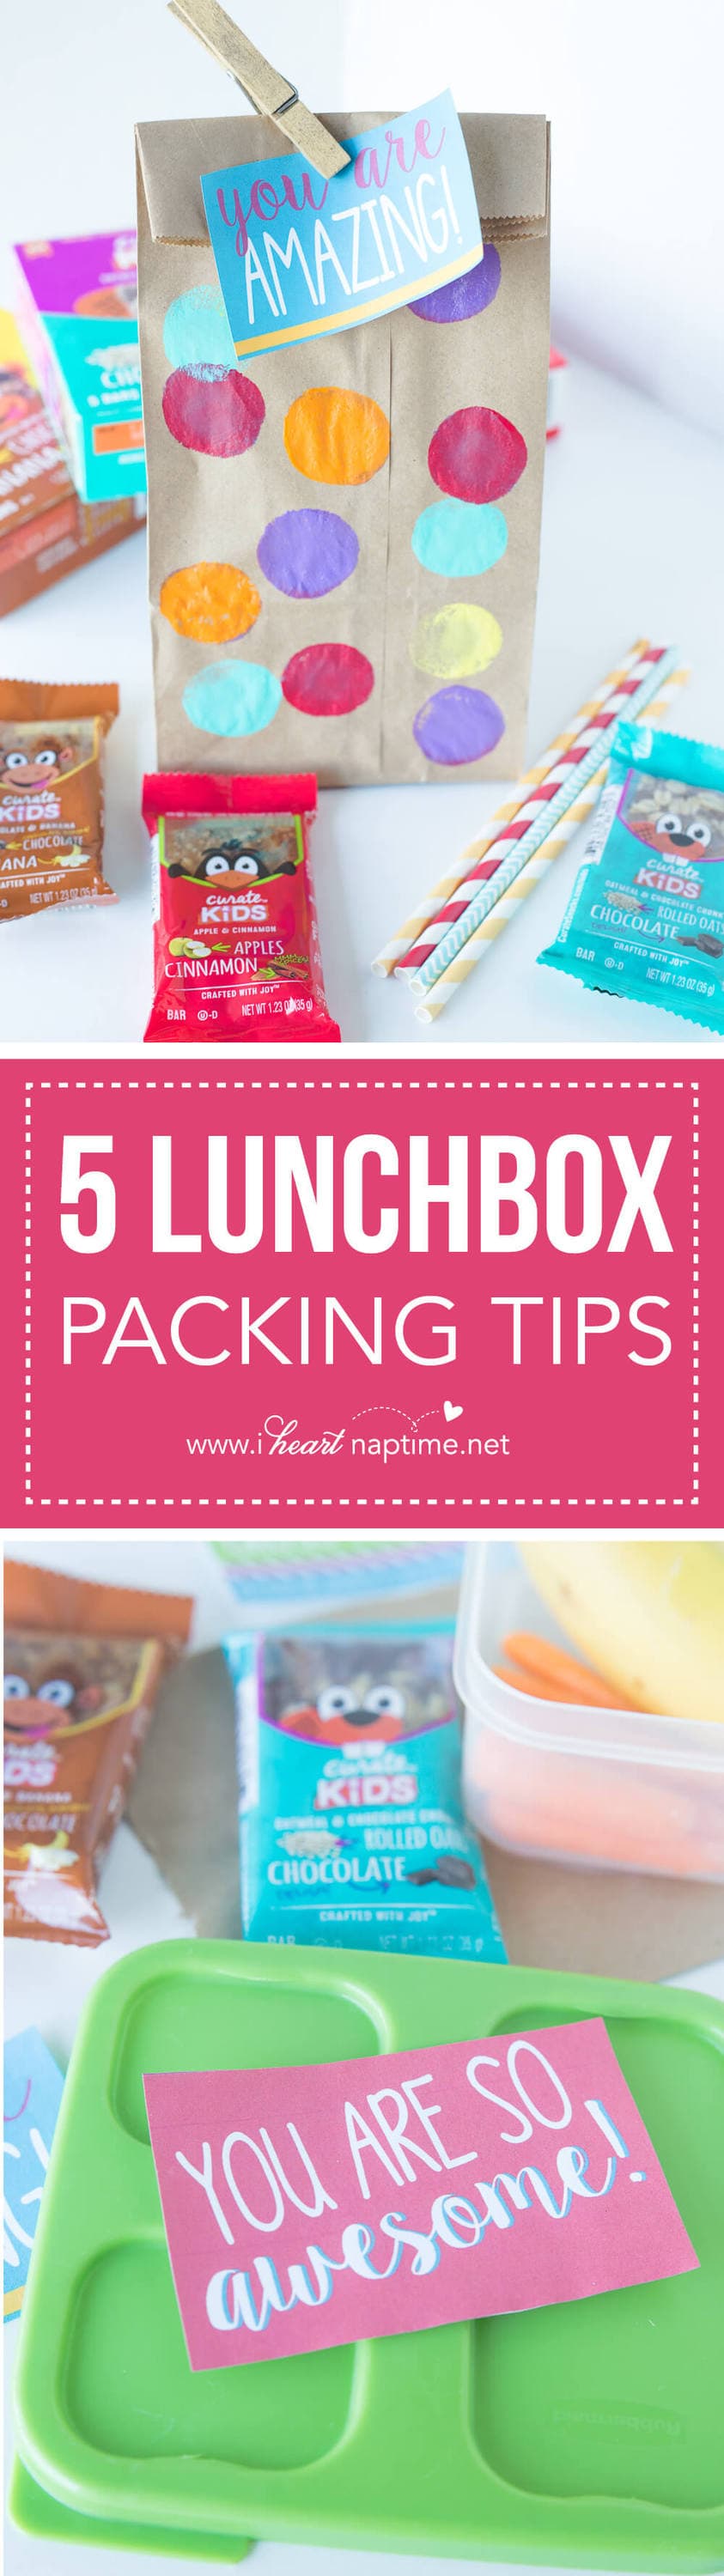 Five Lunchbox Packing Tips... get ready for back-to-school with these great tips to help organize lunch packing and make them fun! These simple tips will help make lunchbox packing less stressful for the parents, too!